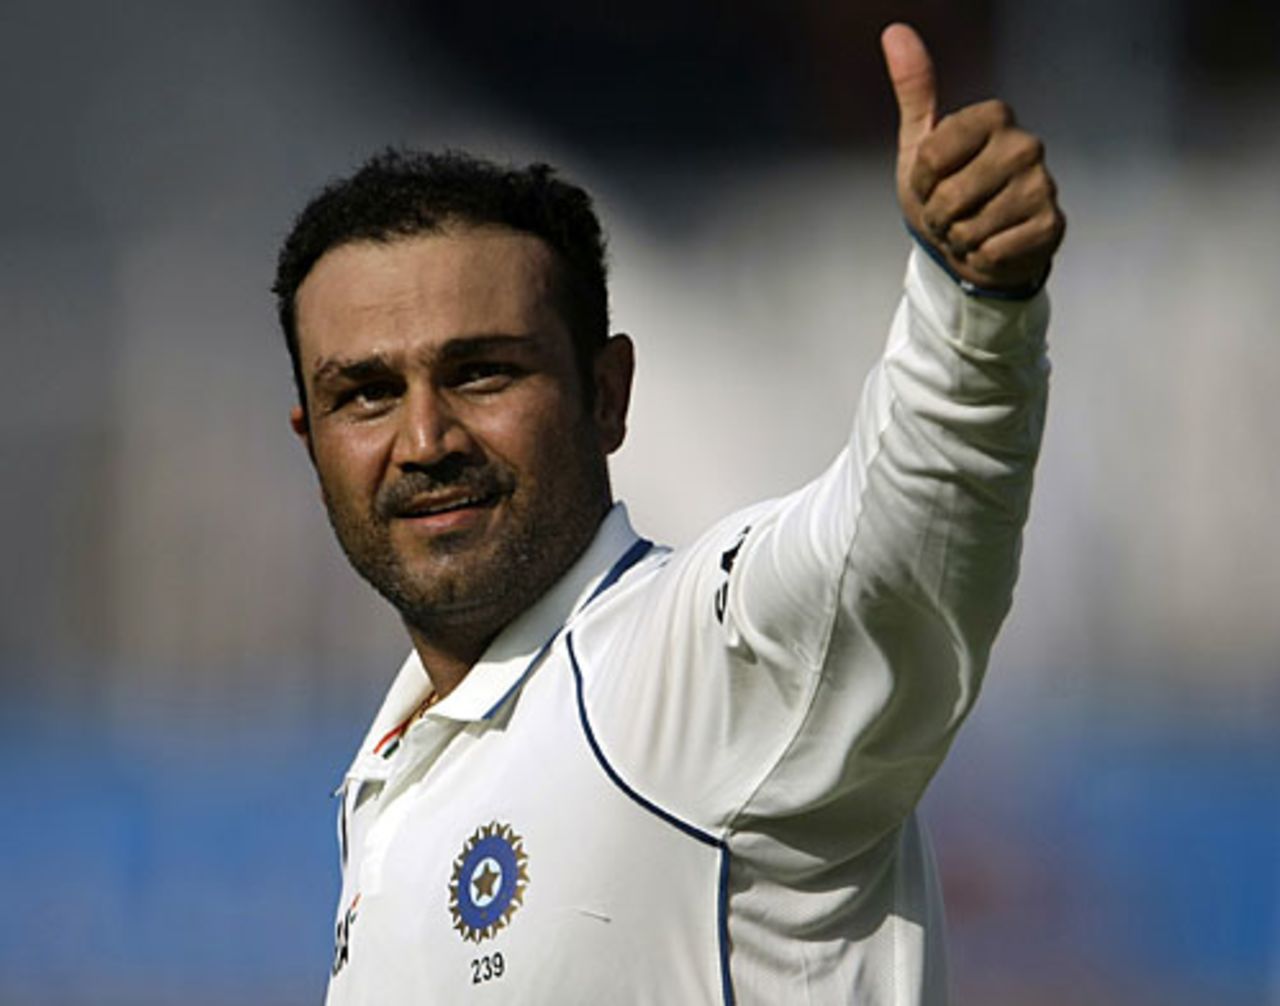 Virender Sehwag gives the thumbs up after getting to his double century, India v Sri Lanka, 3rd Test, Mumbai, 2nd day, December 3, 2009